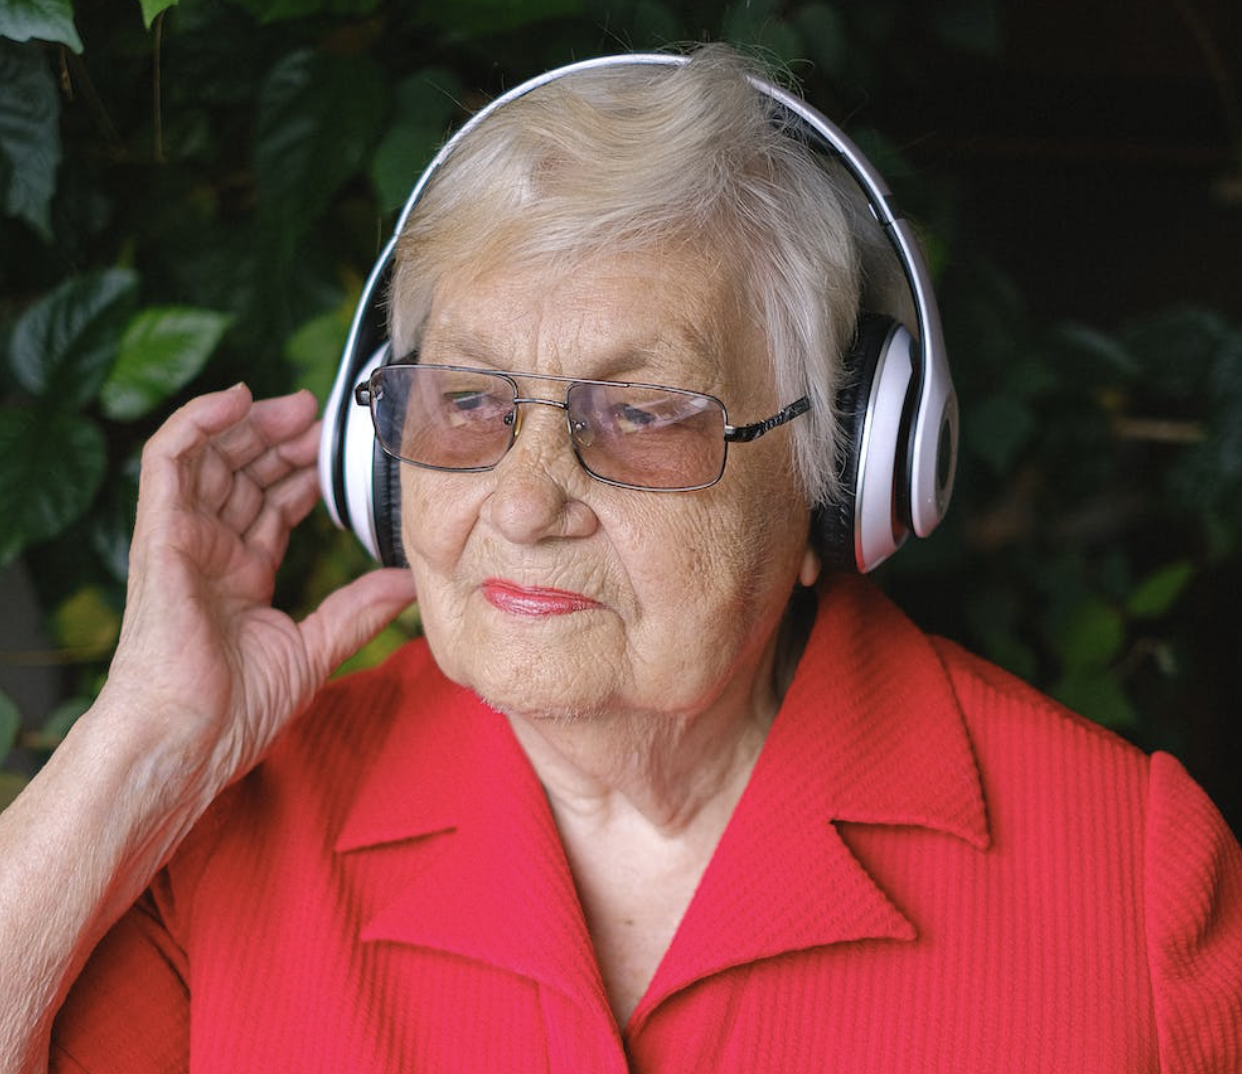 Music therapy improves social engagement for those with dementia￼